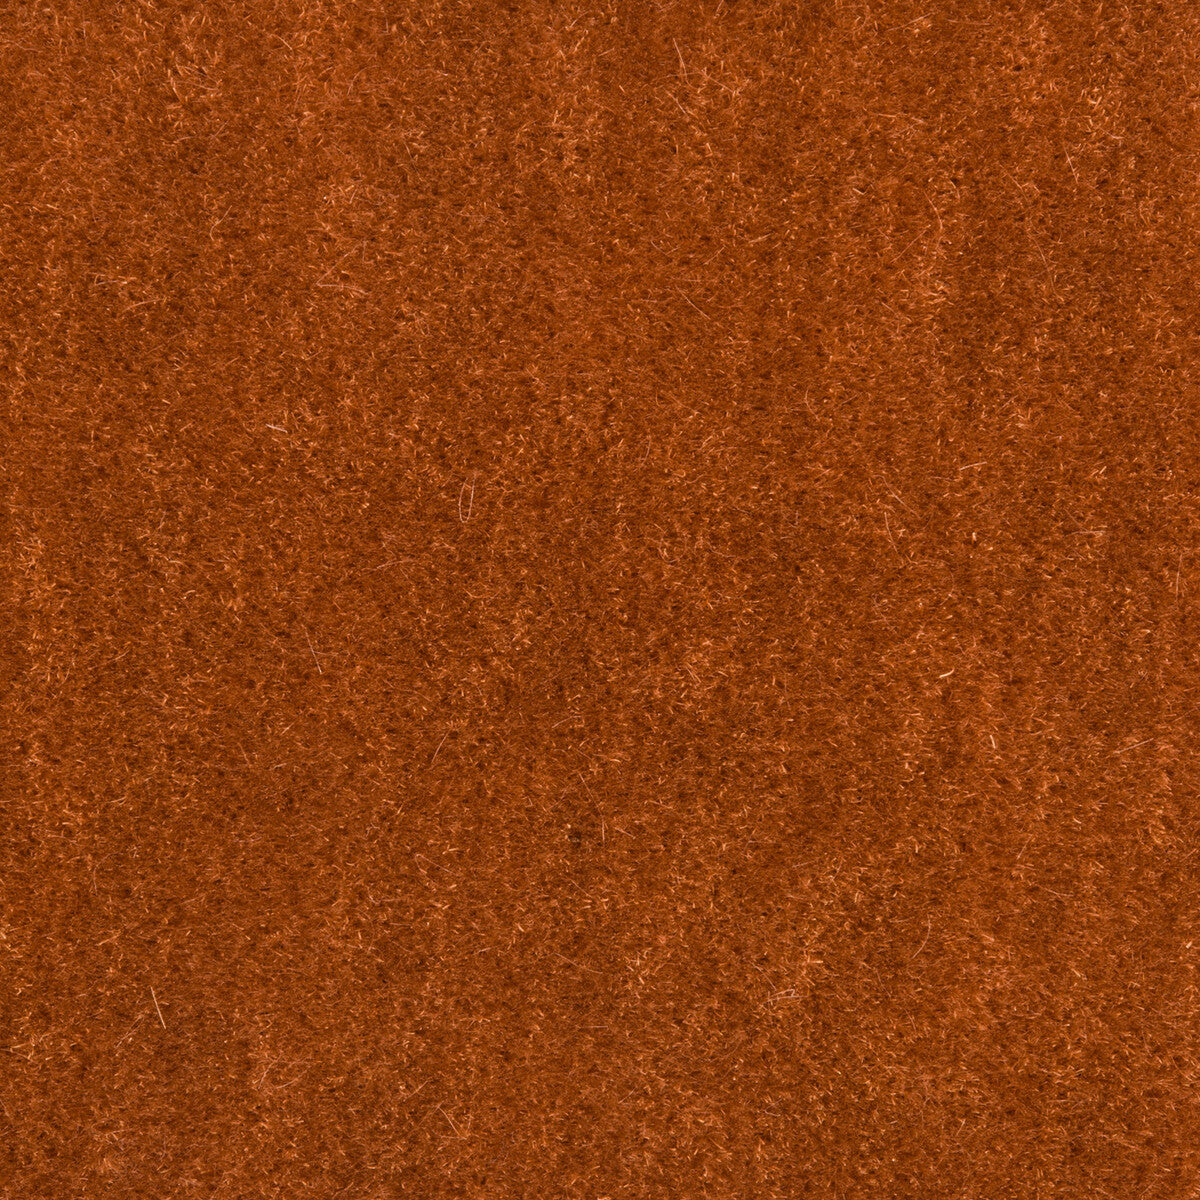 Bachelor Mohair fabric in cognac color - pattern 8014101.416.0 - by Brunschwig &amp; Fils